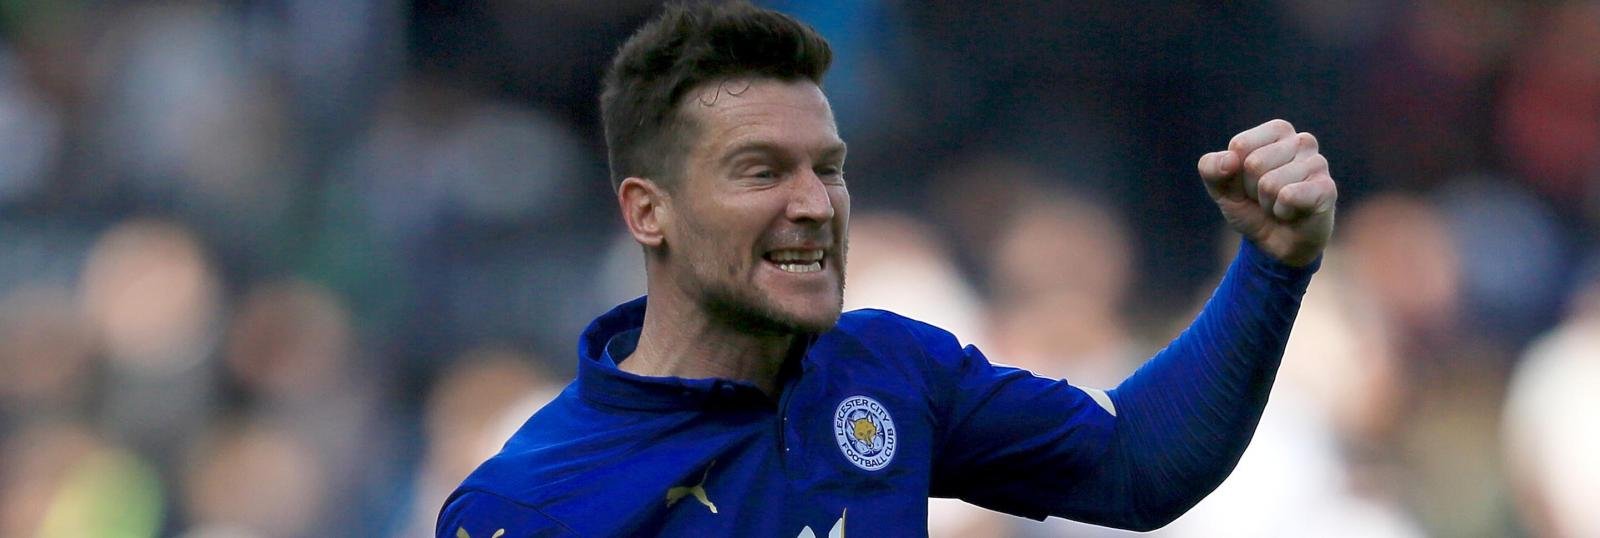 Boro close on £4m deal for Leicester forward